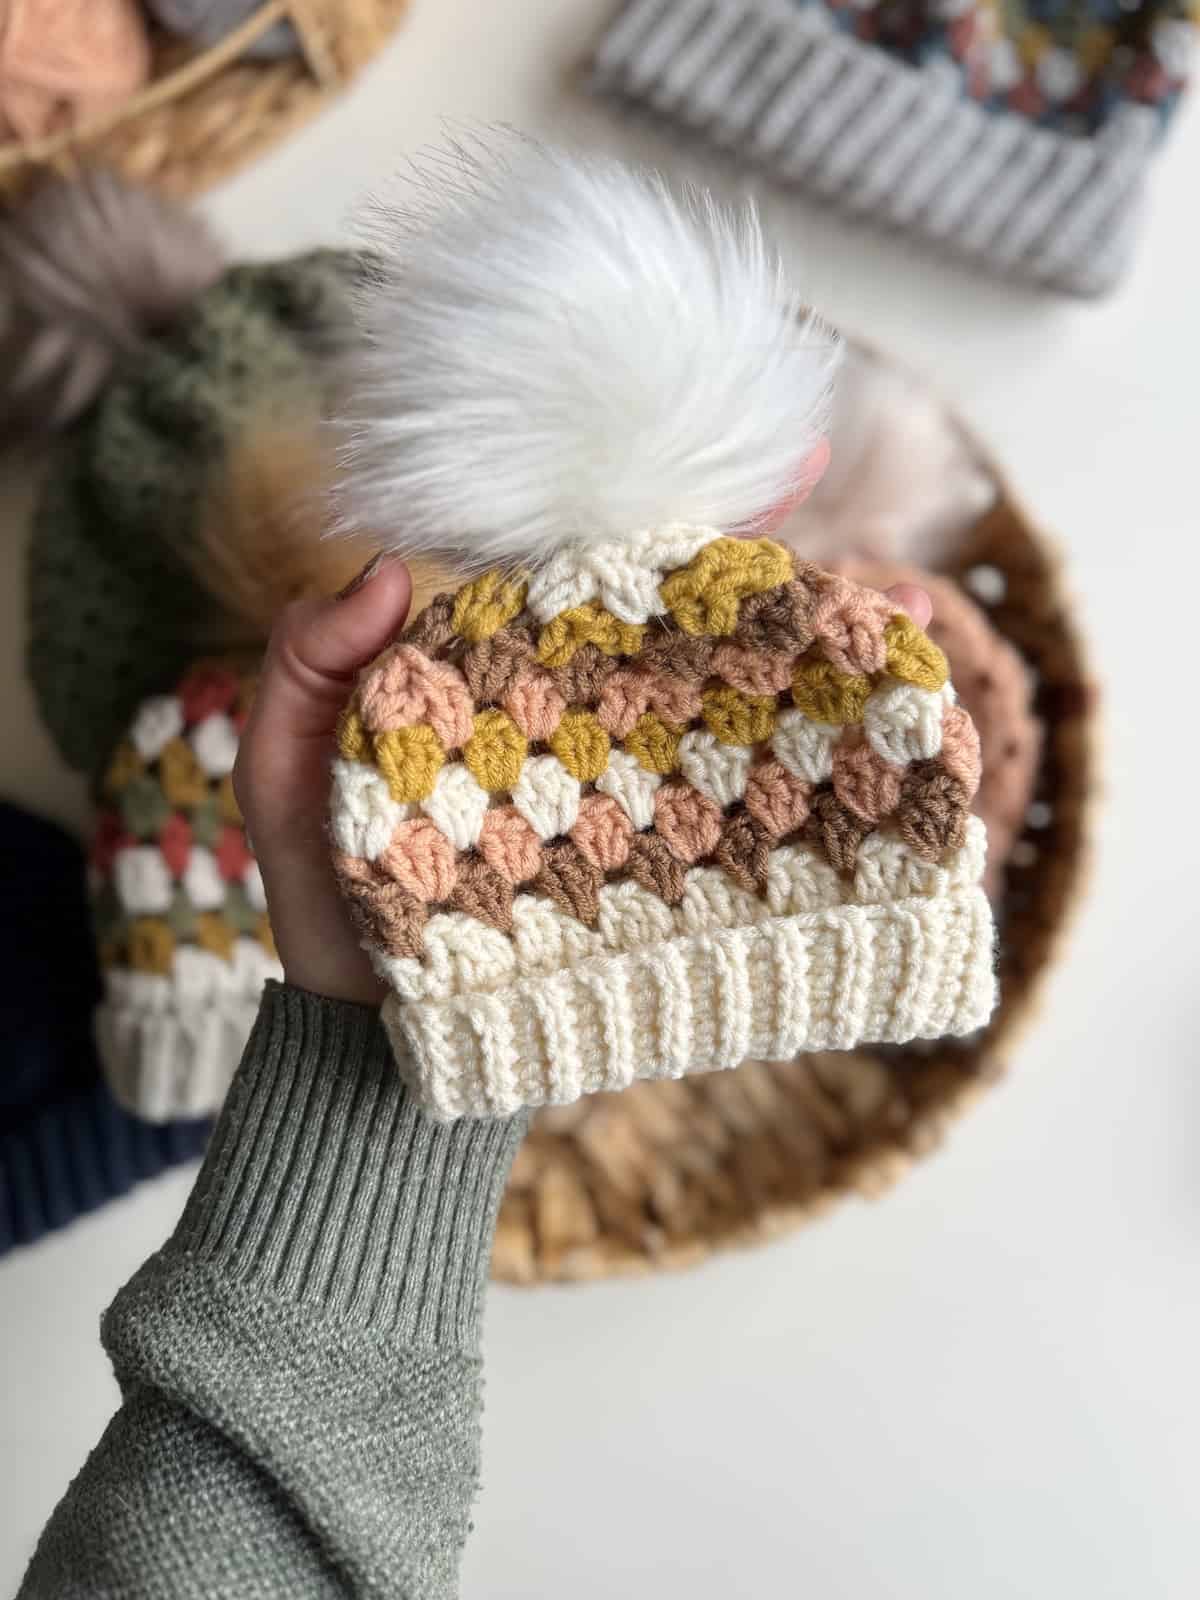 A person holding a crocheted hat with a pom pom.